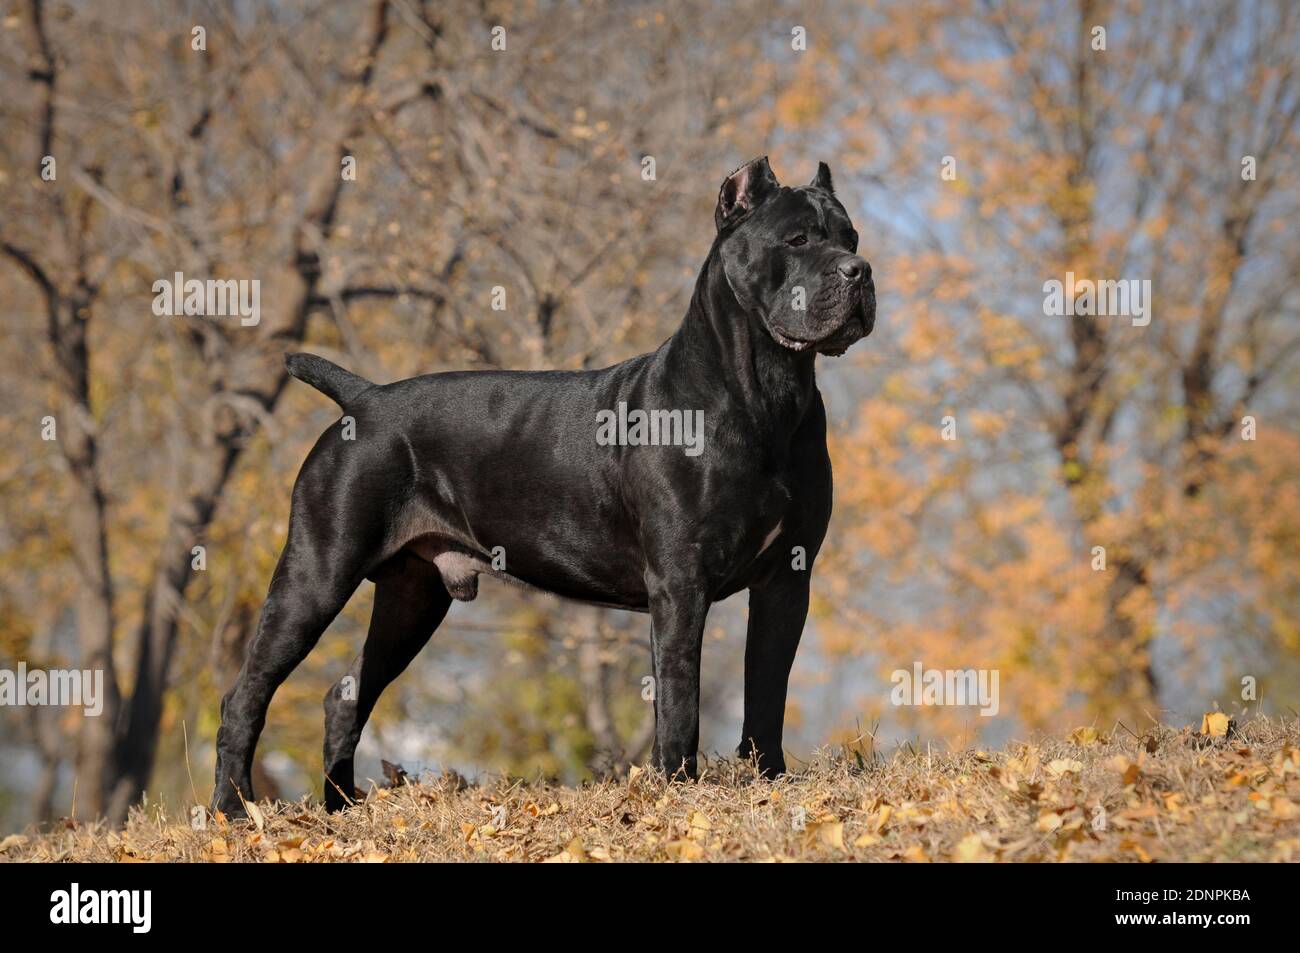 Cane Corso, a Dog Breed from Italie, Mother and Puppies on Grass Stock  Photo - Alamy